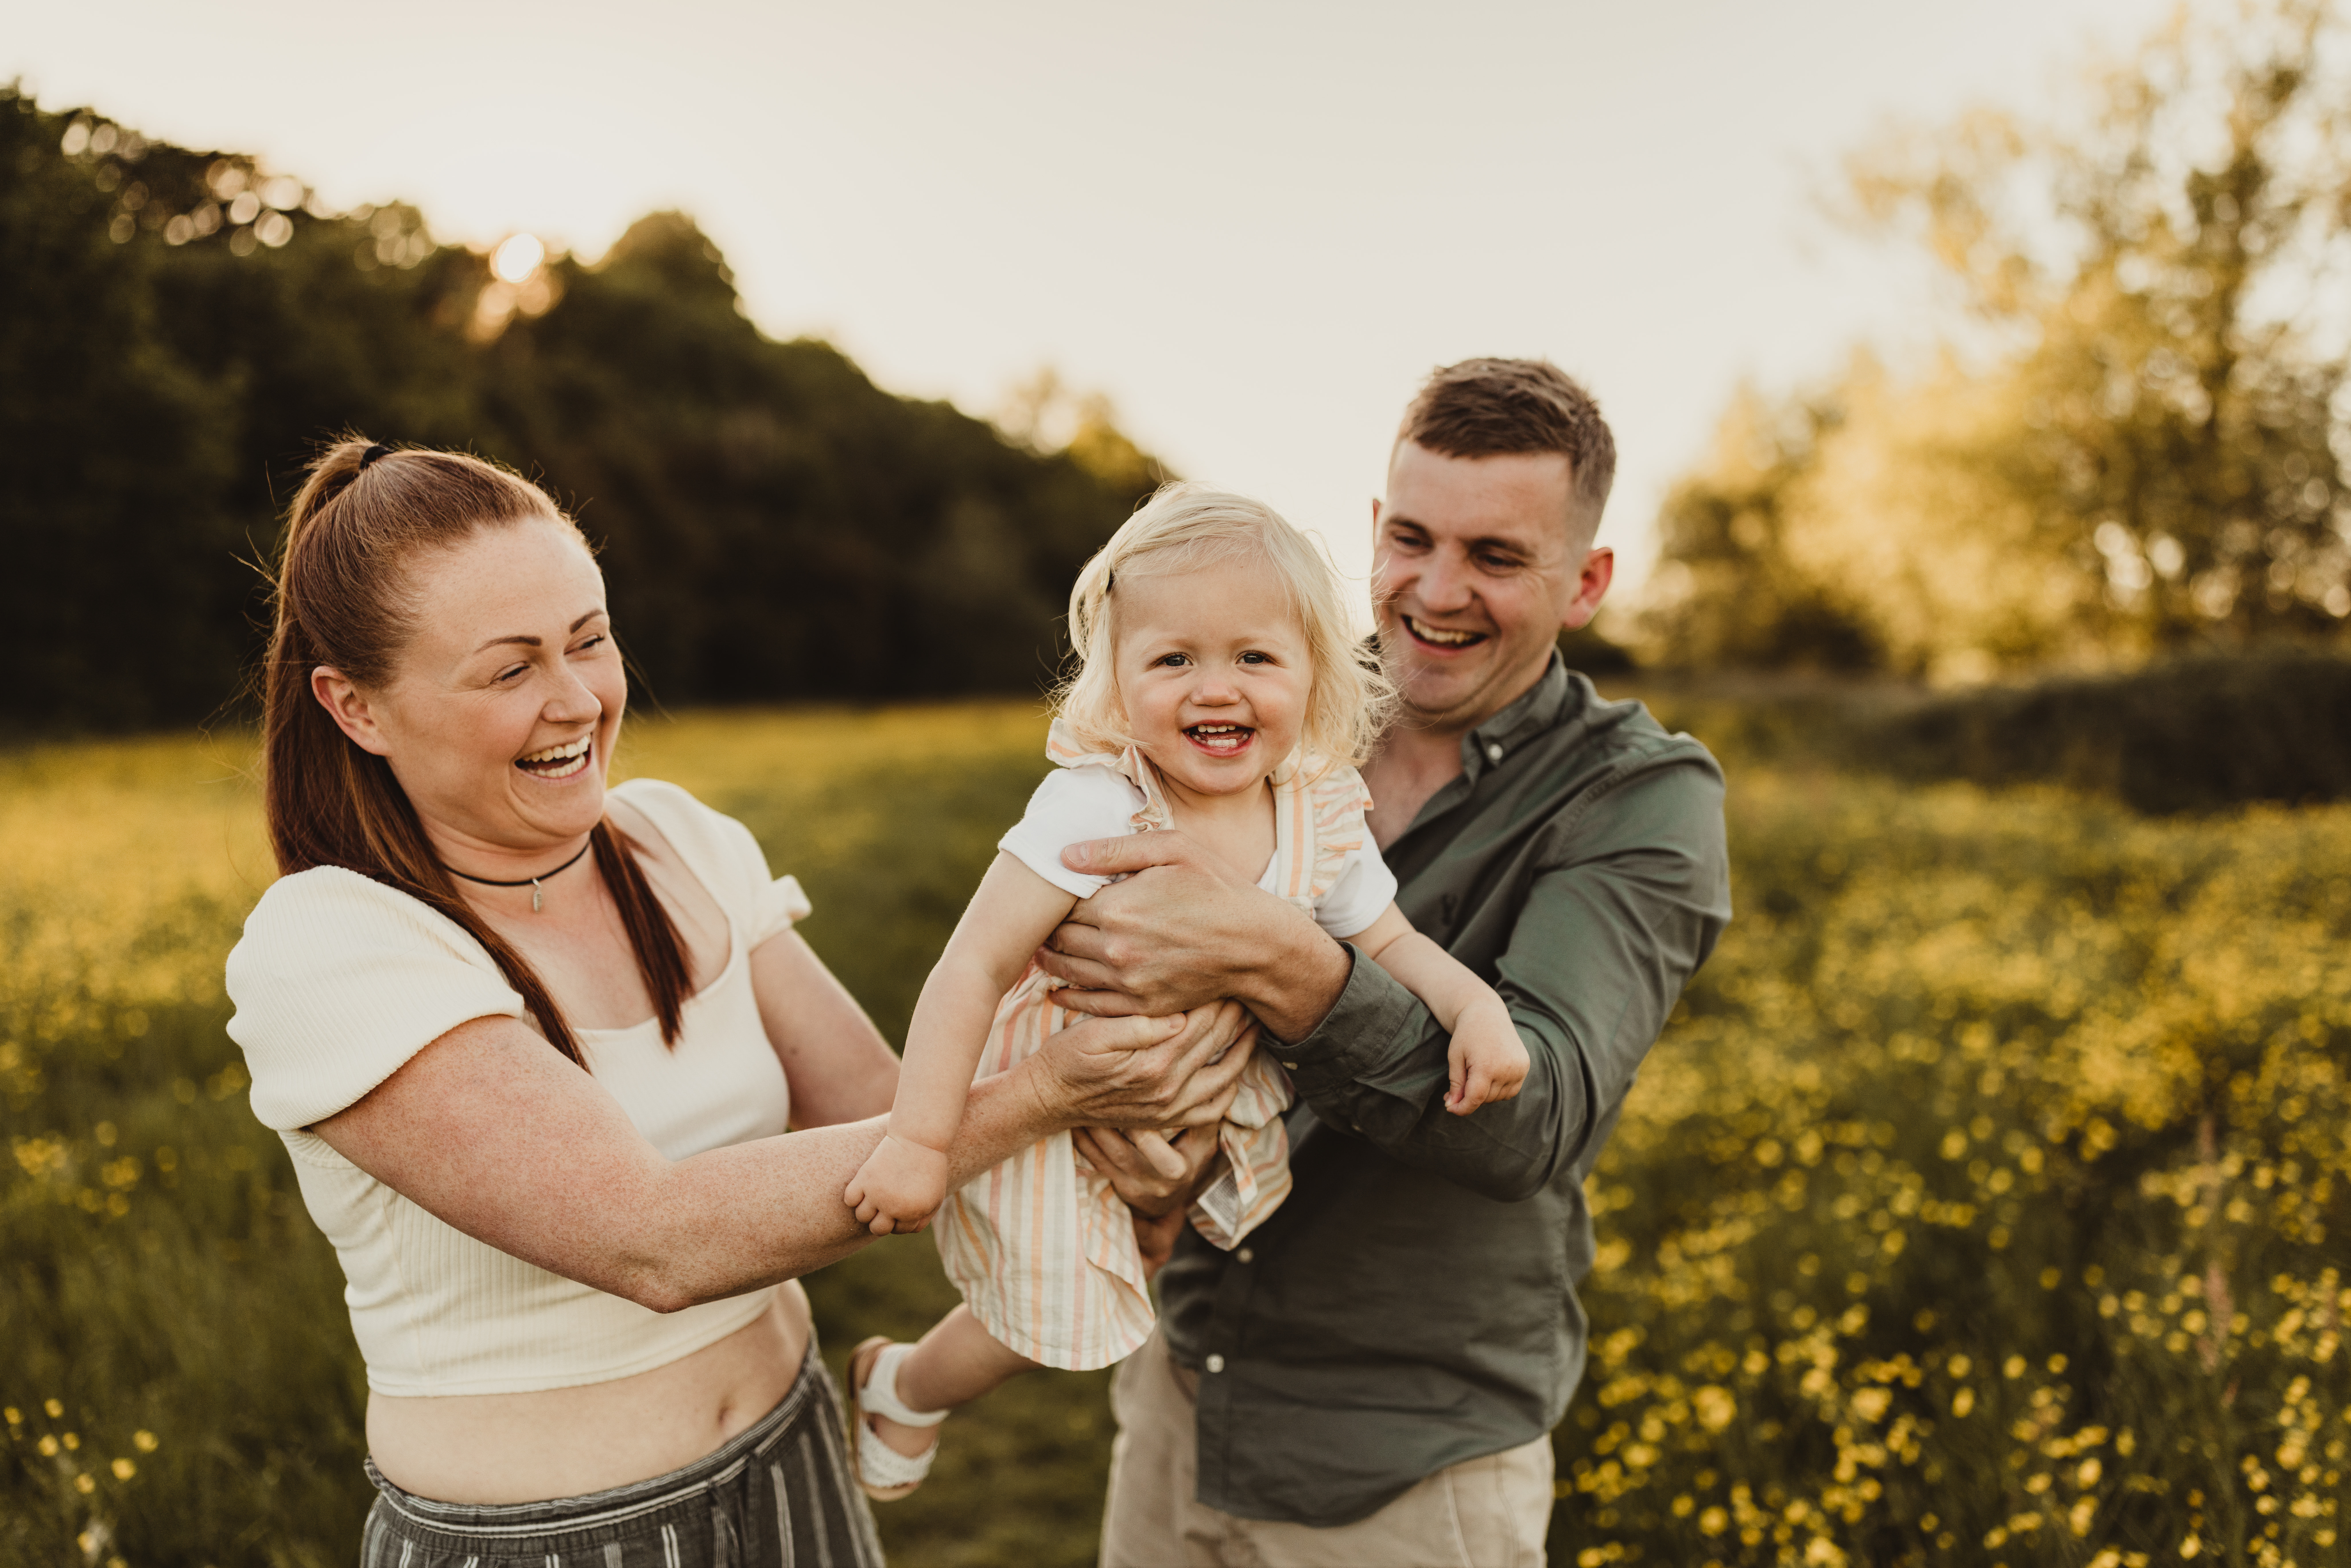 Fun Family photoshoot amongst the buttercups in Herefordshire